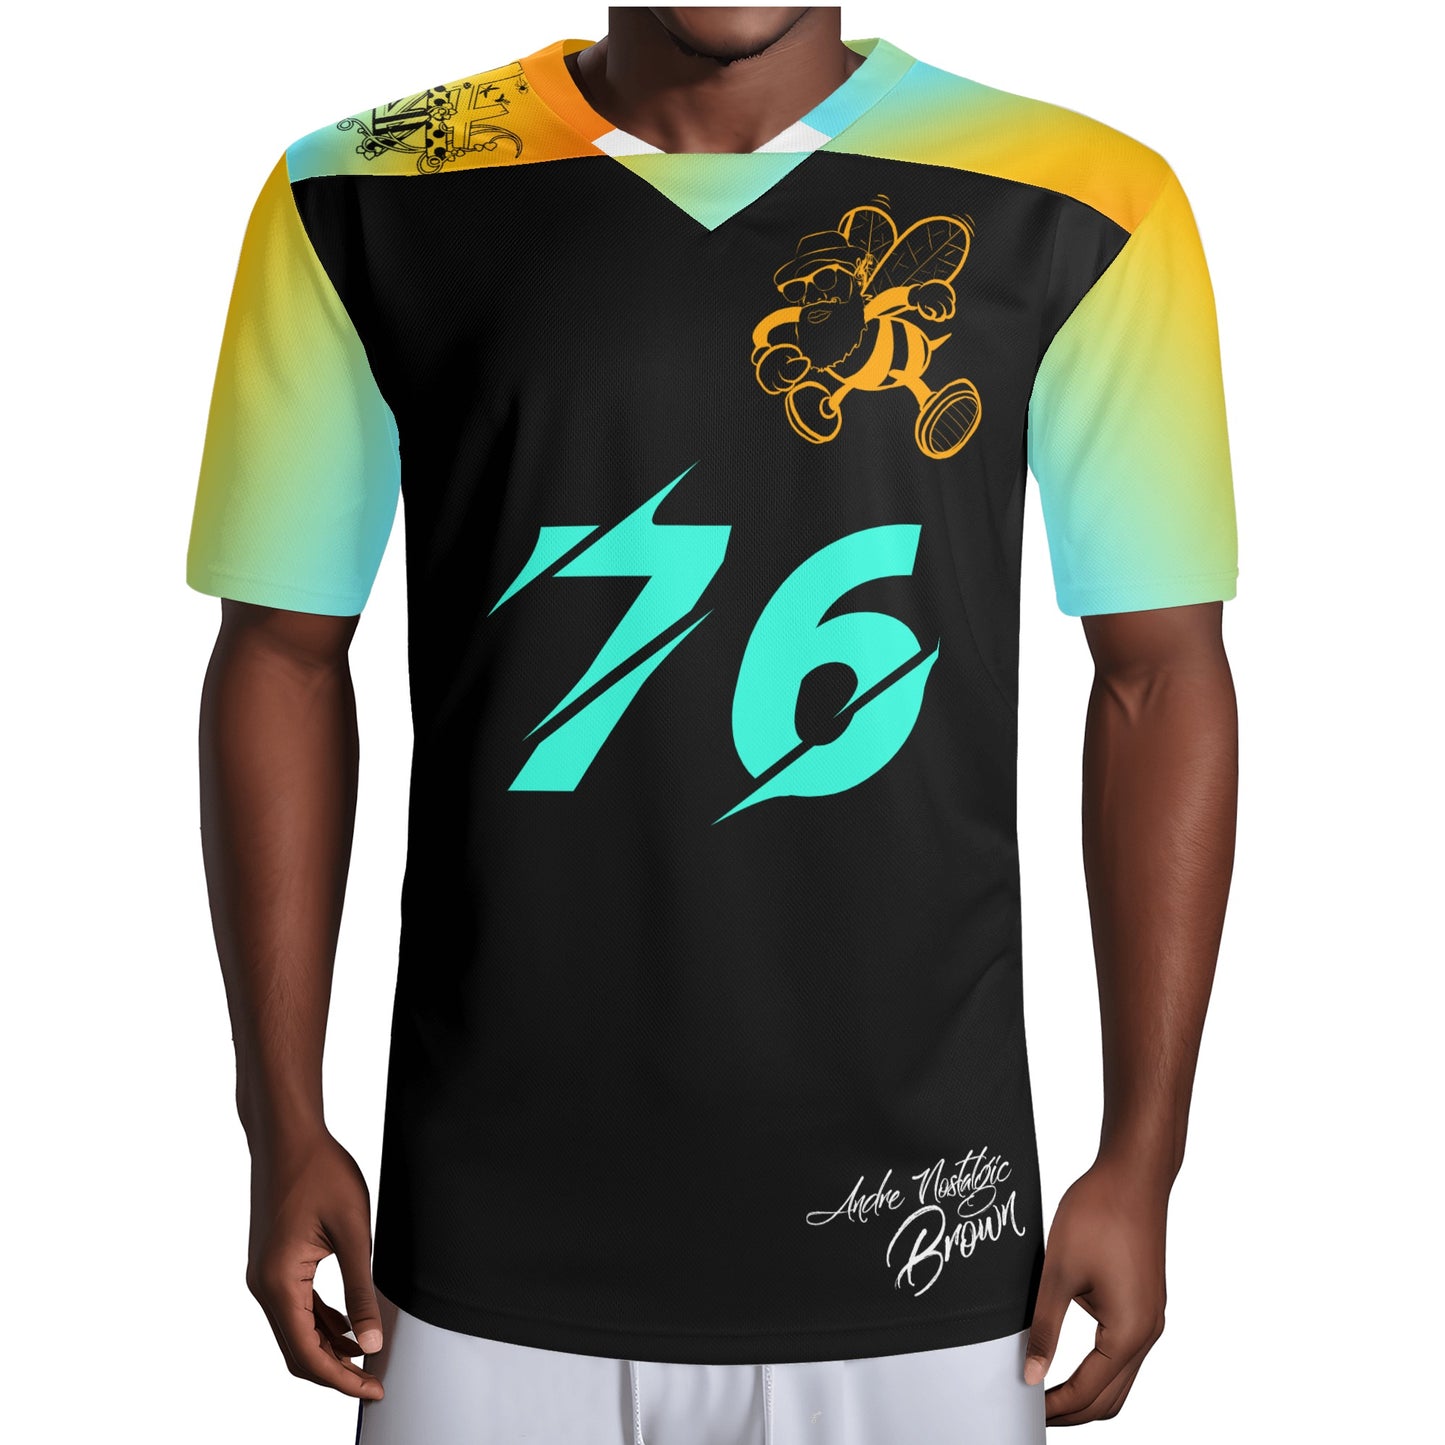 Blk Insct Famili Mens All Over Printing Rugby Jersey